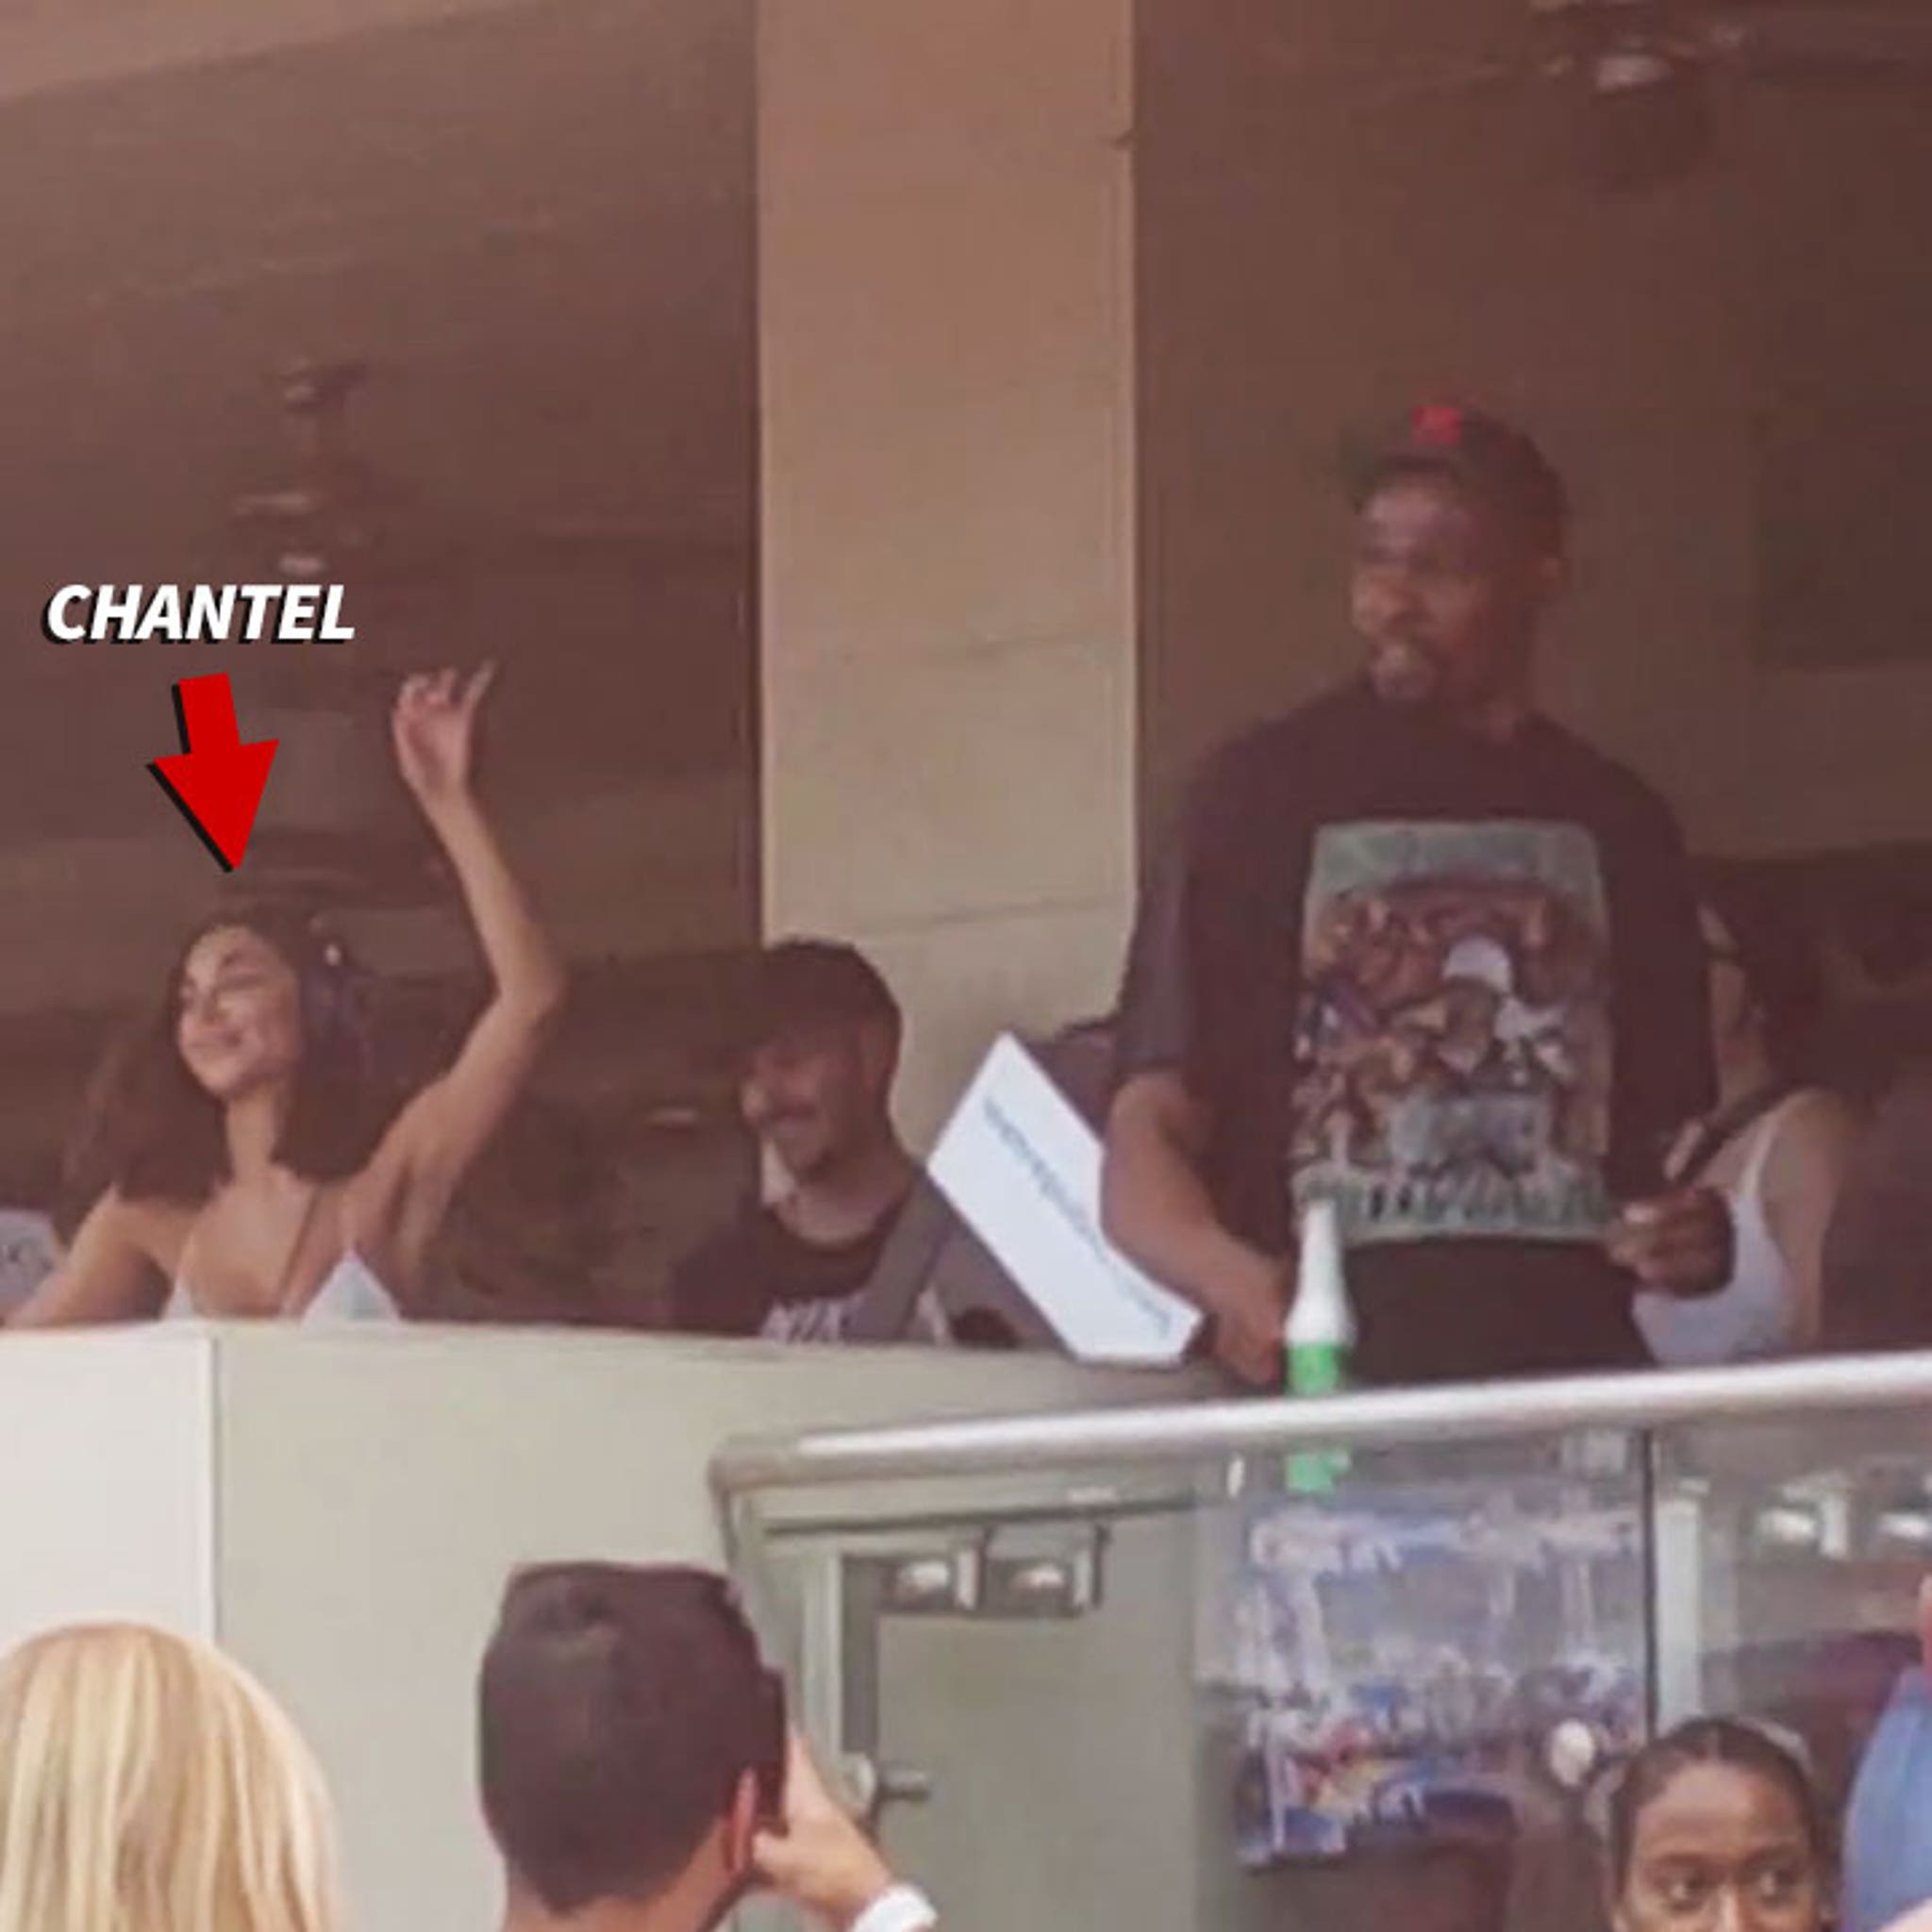 chantel jeffries and kyrie